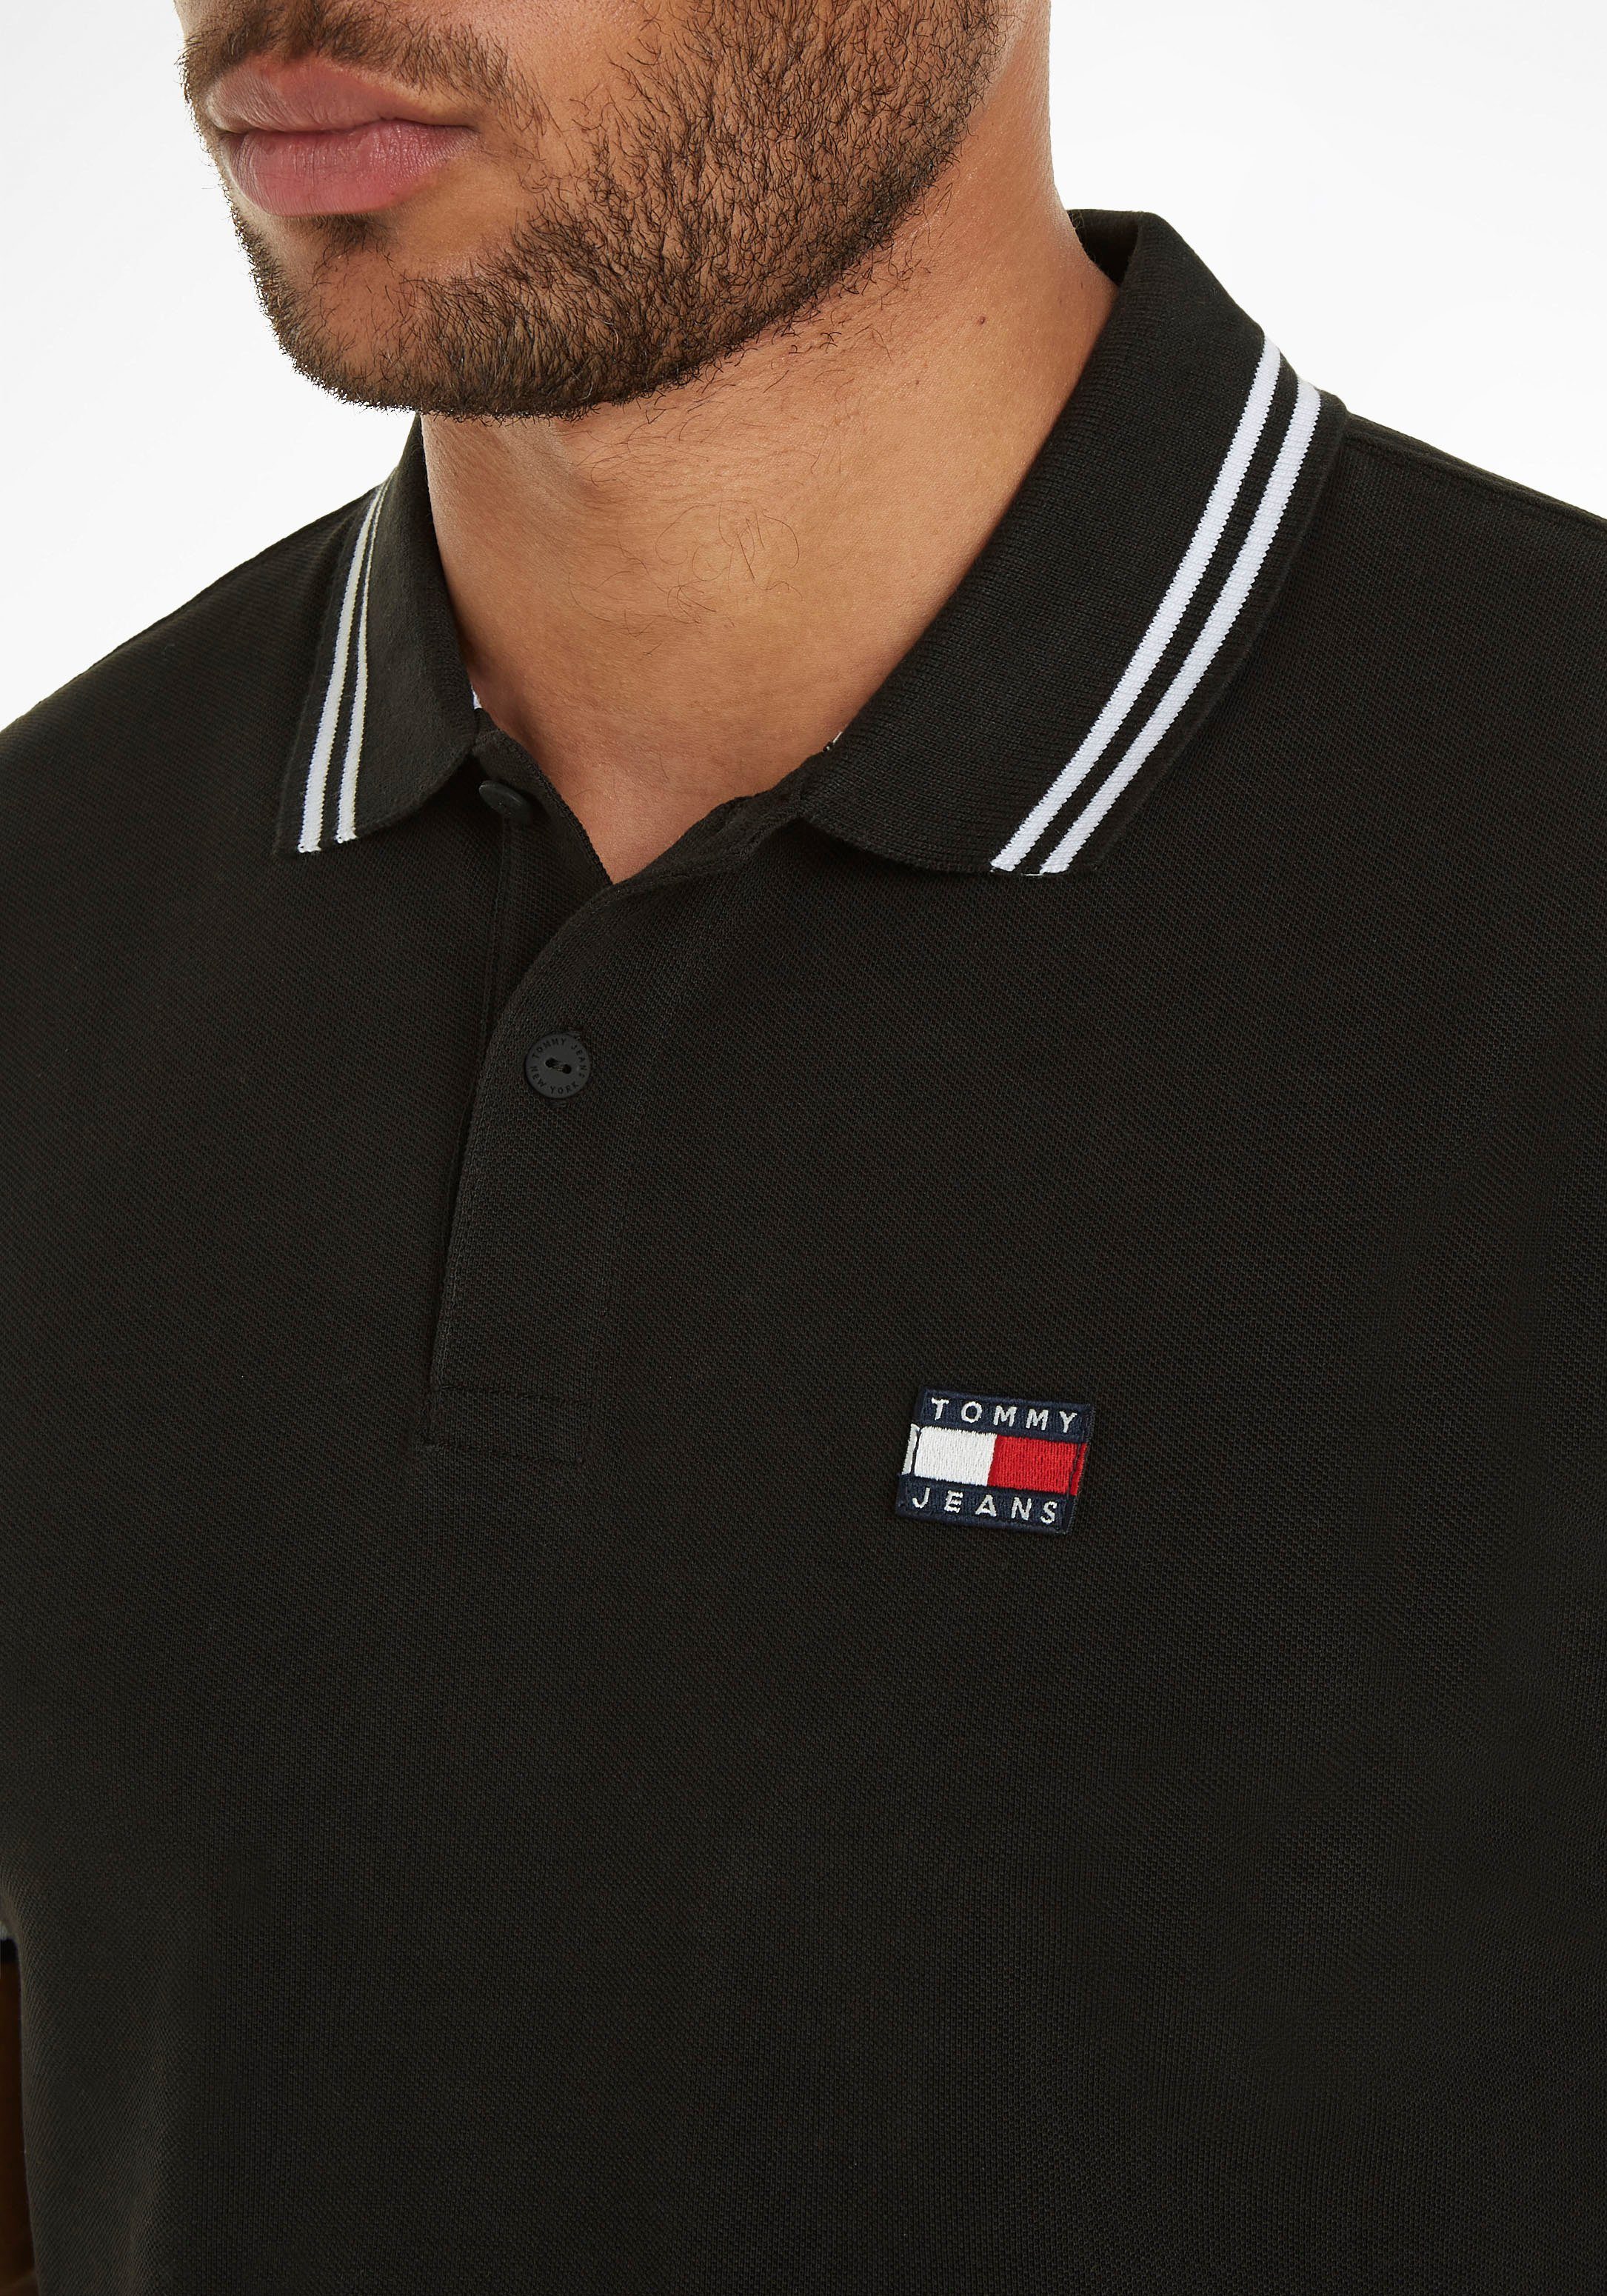 TJM TIPPING Black Jeans CLSC DETAIL Tommy POLO Poloshirt